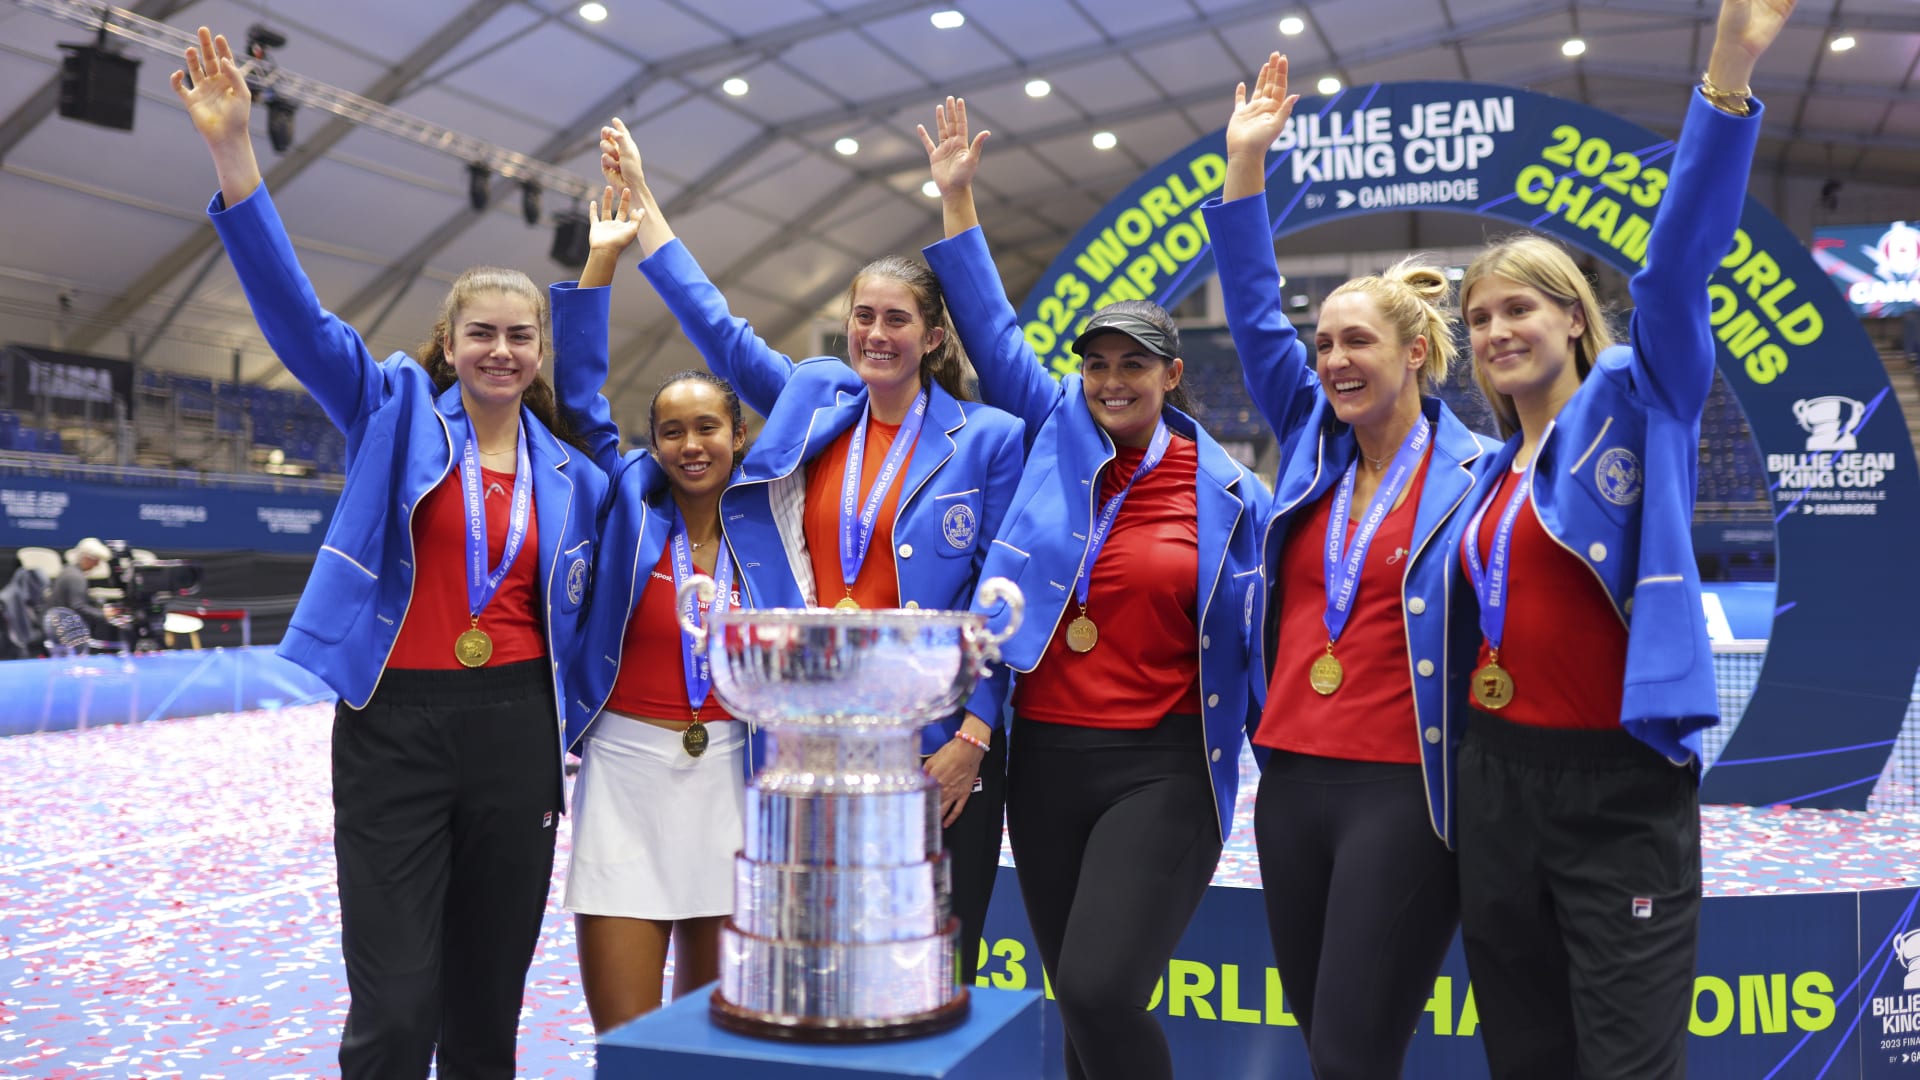 Canada beats Italy to win first-ever Billie Jean King Cup title